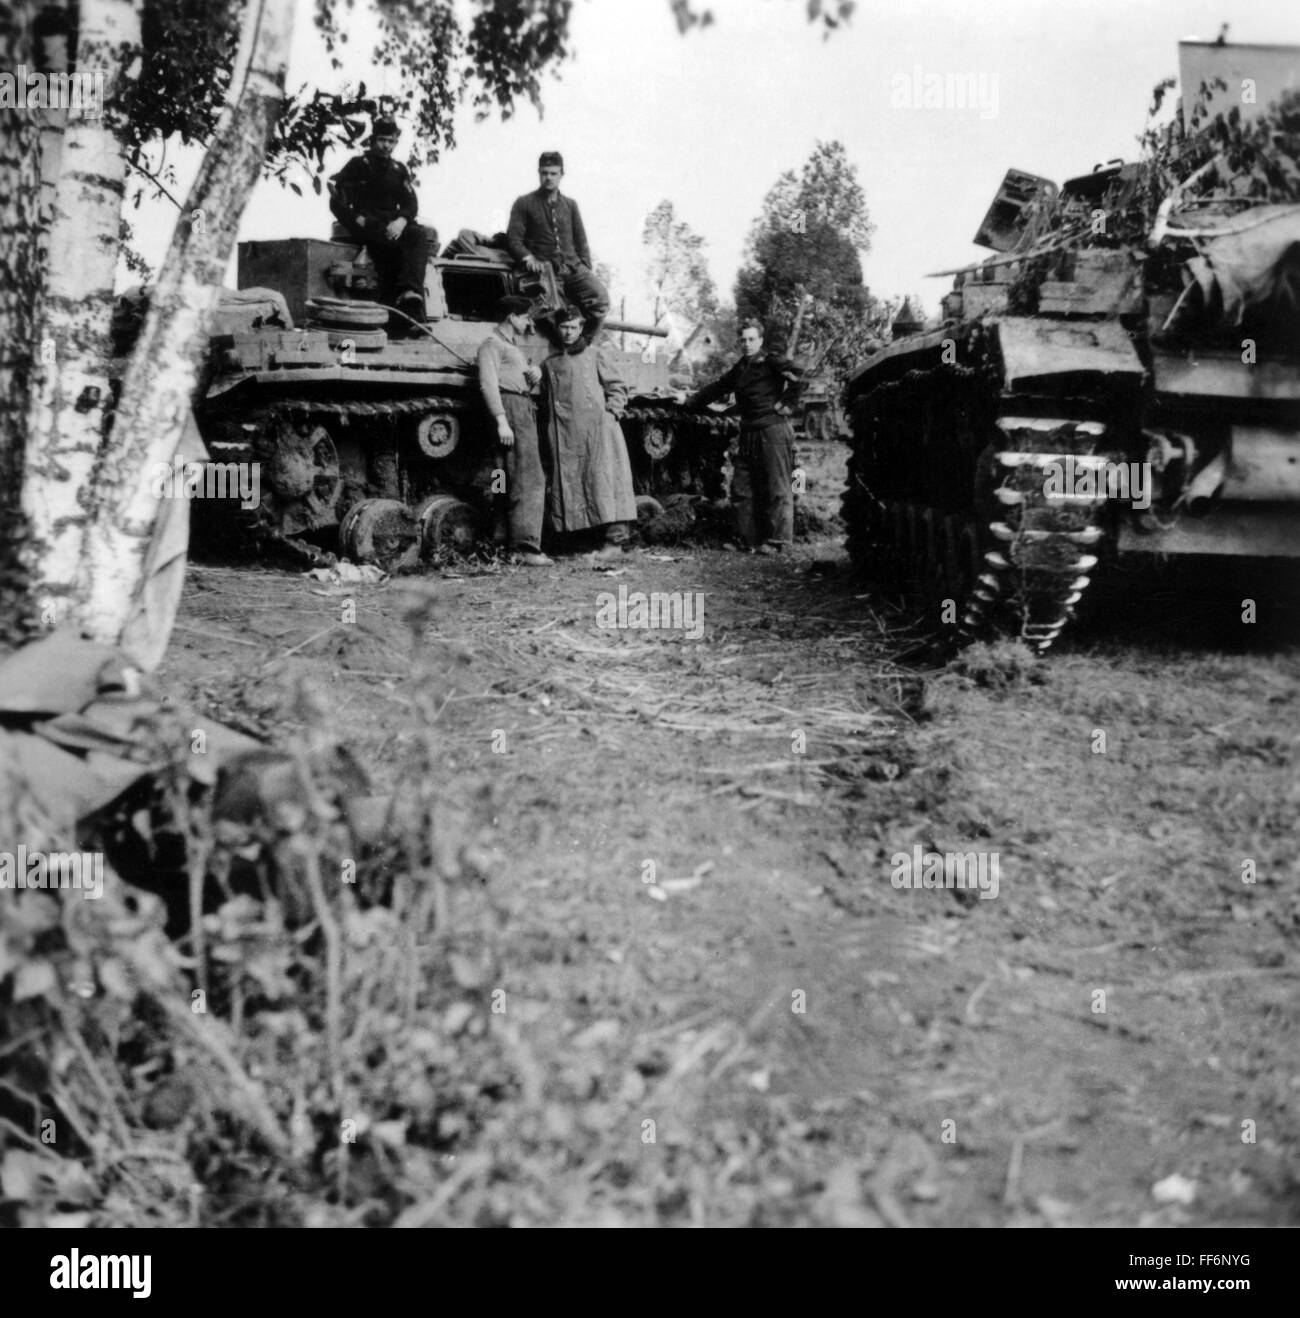 Second World War / WWII, Soviet Union, summer 1941, two German Panzer III tanks of Panzer Group Kleist (1st Panzer Army), Army Group South, Ukraine, Additional-Rights-Clearences-Not Available Stock Photo